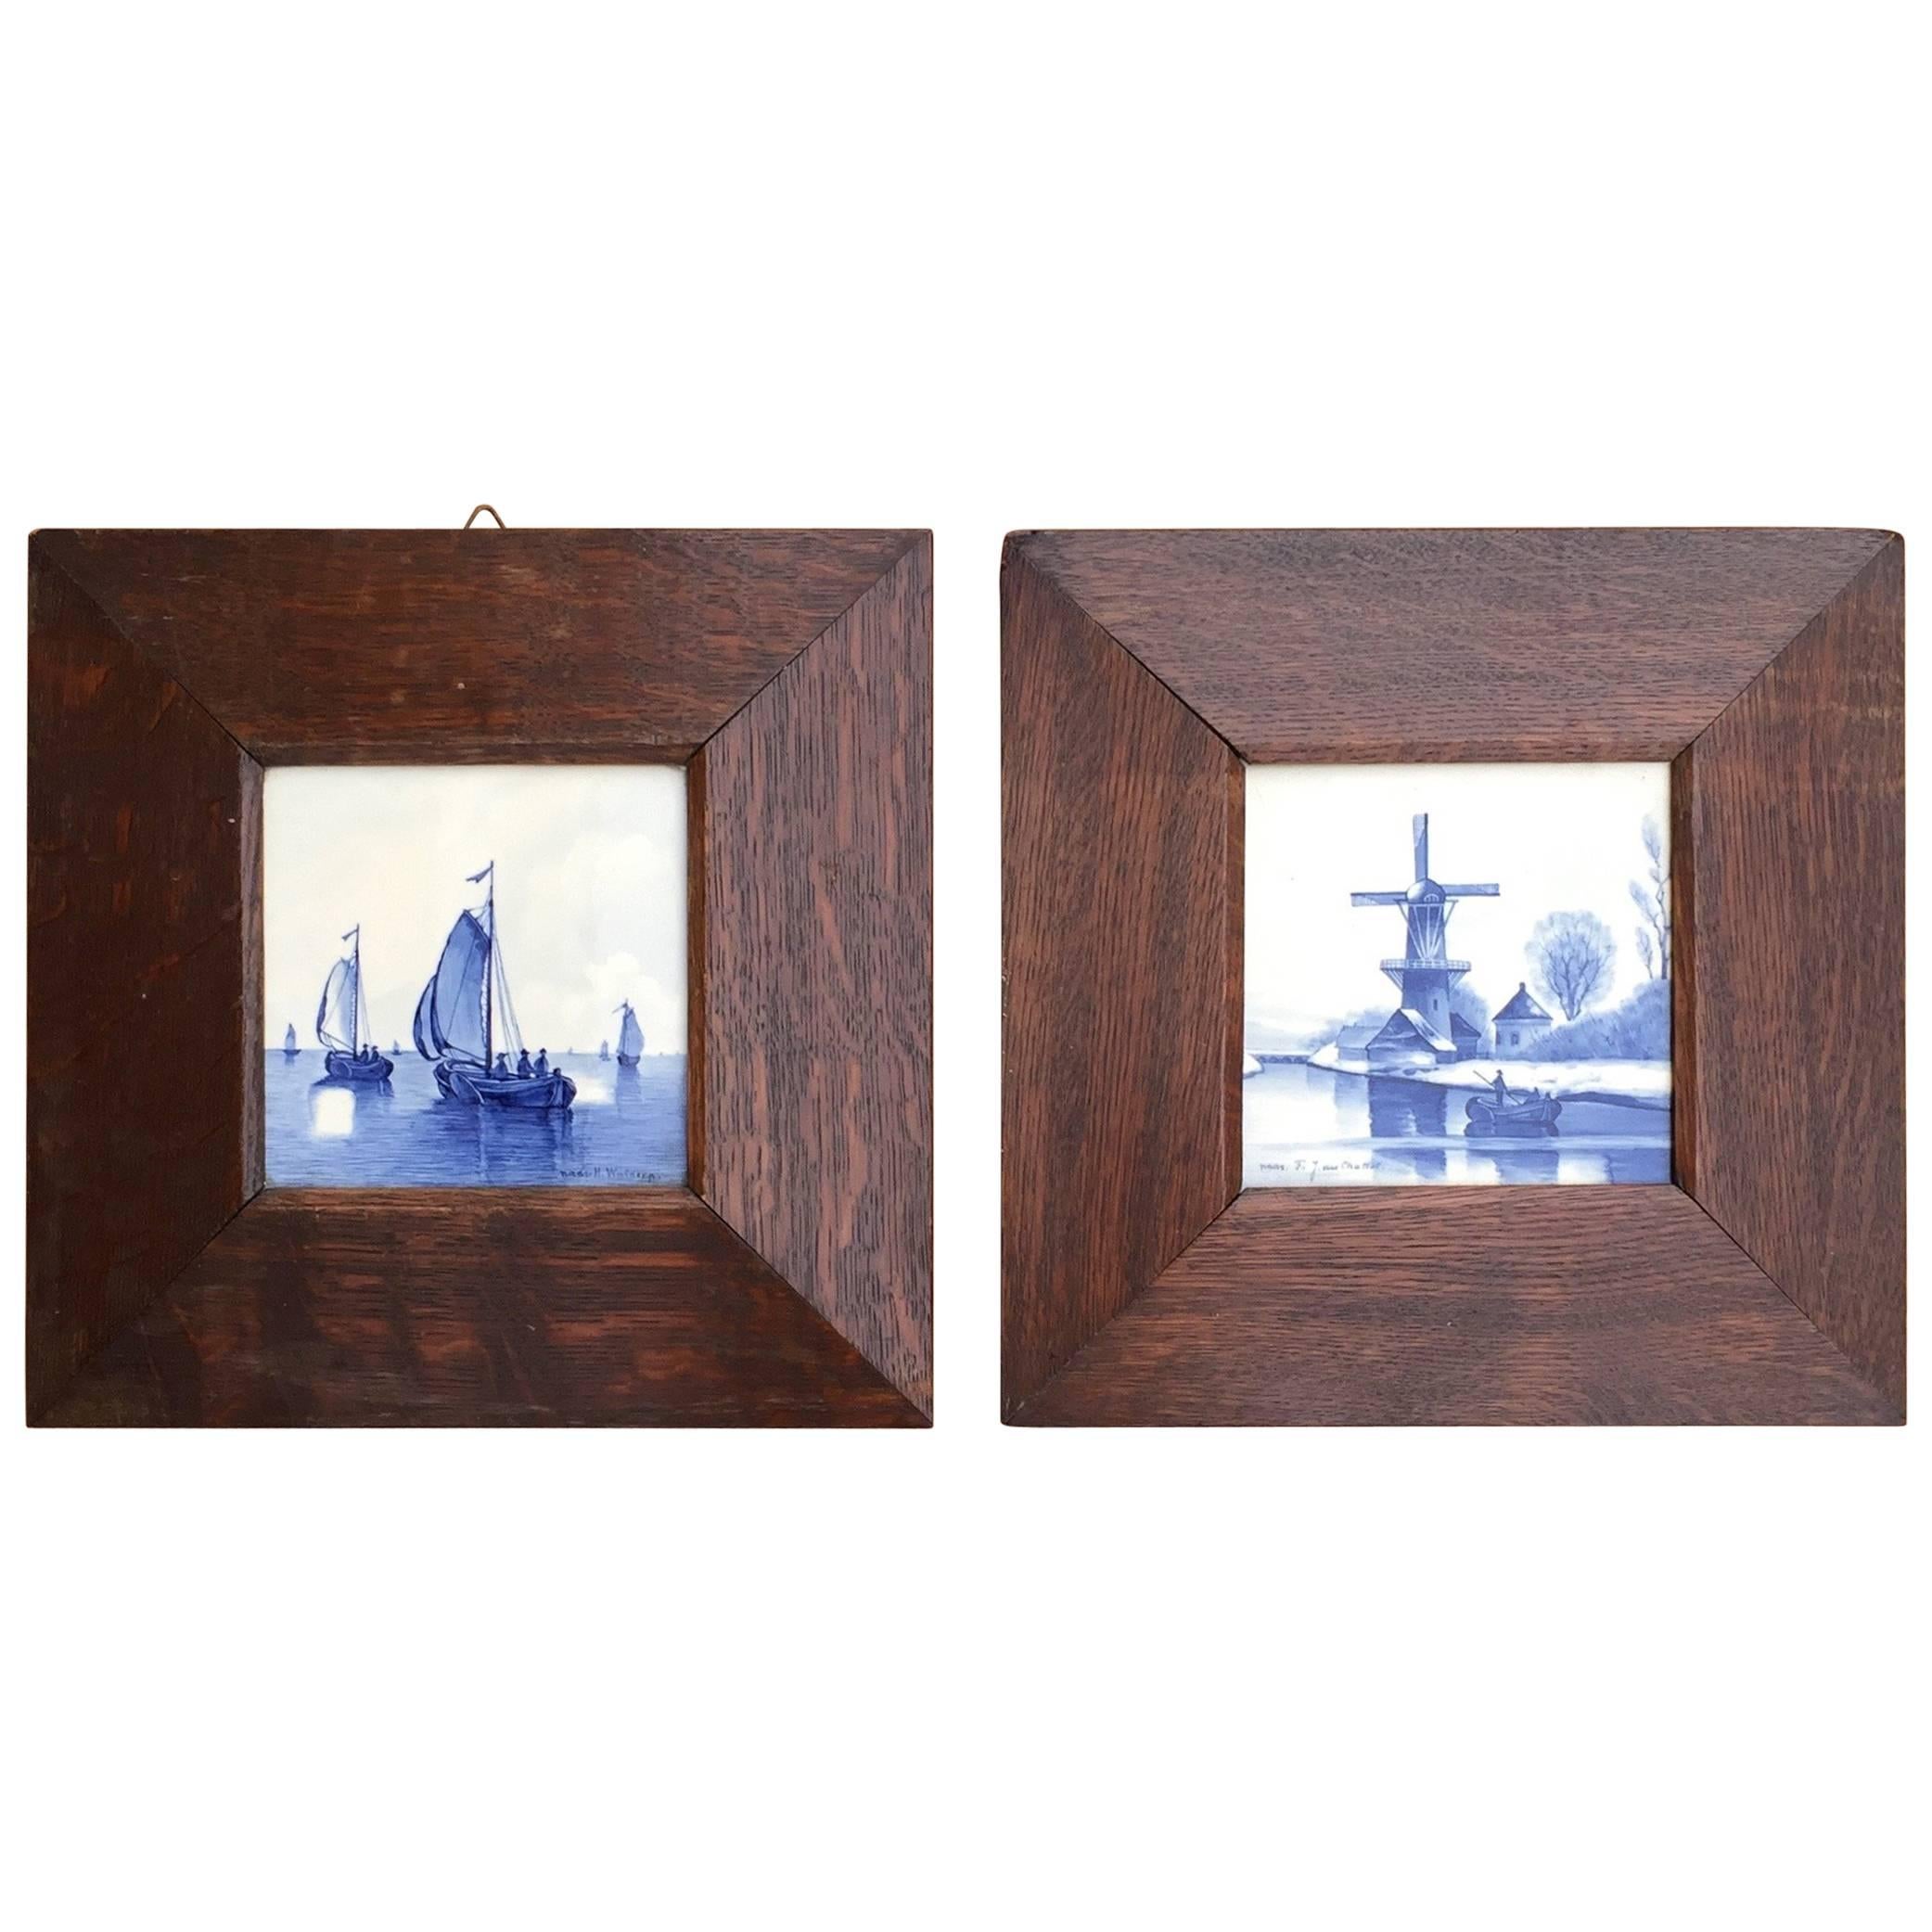 Pair of Hand-Painted Delft Blue Tiles in Picture Frame Landscape and Seascape